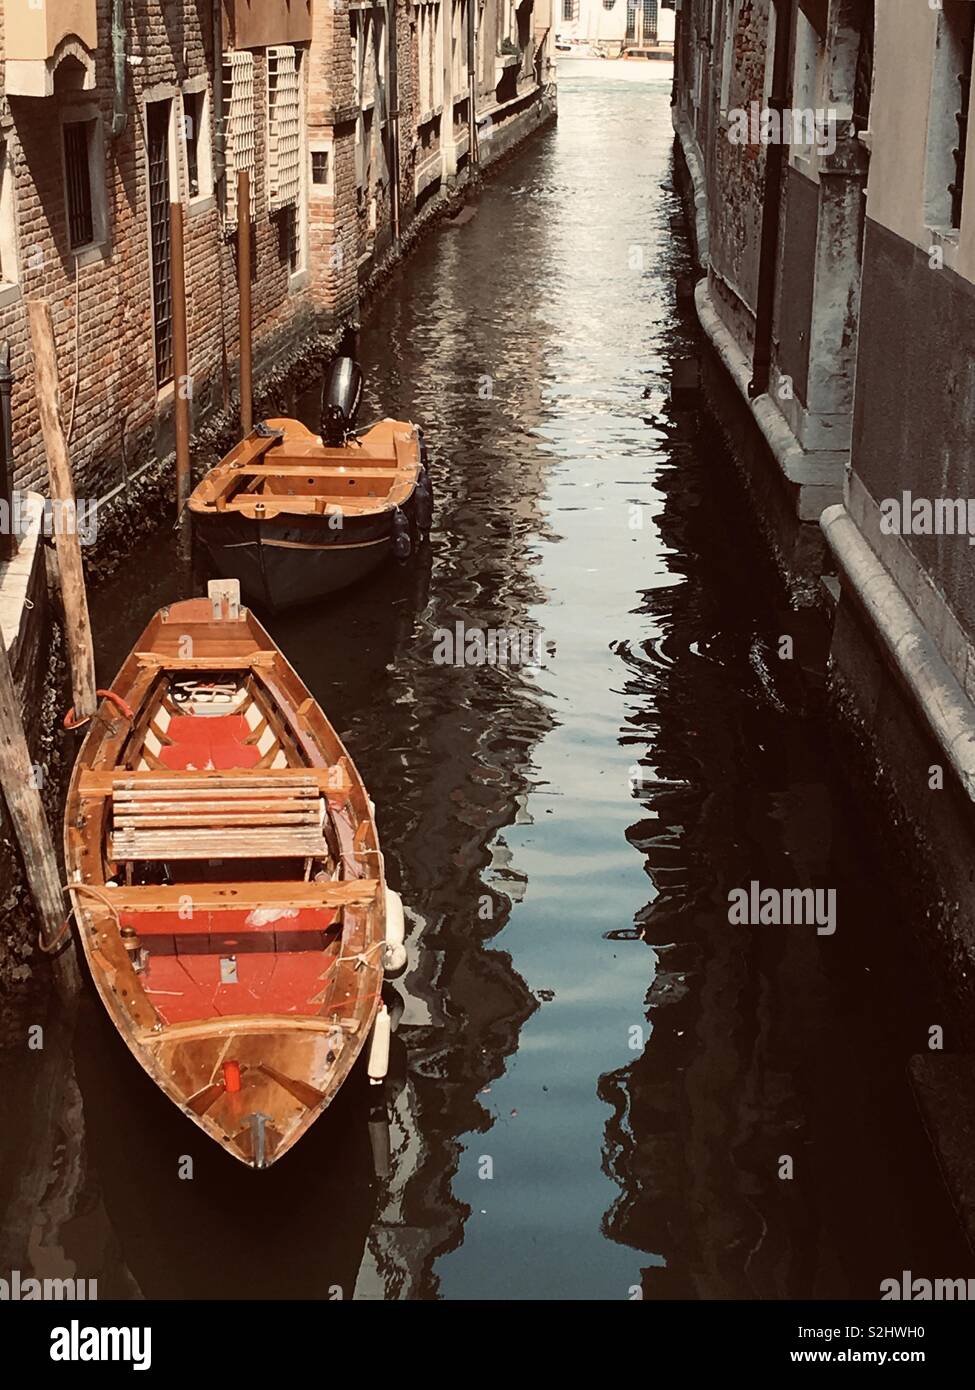 Boats on canal in Venice Stock Photo